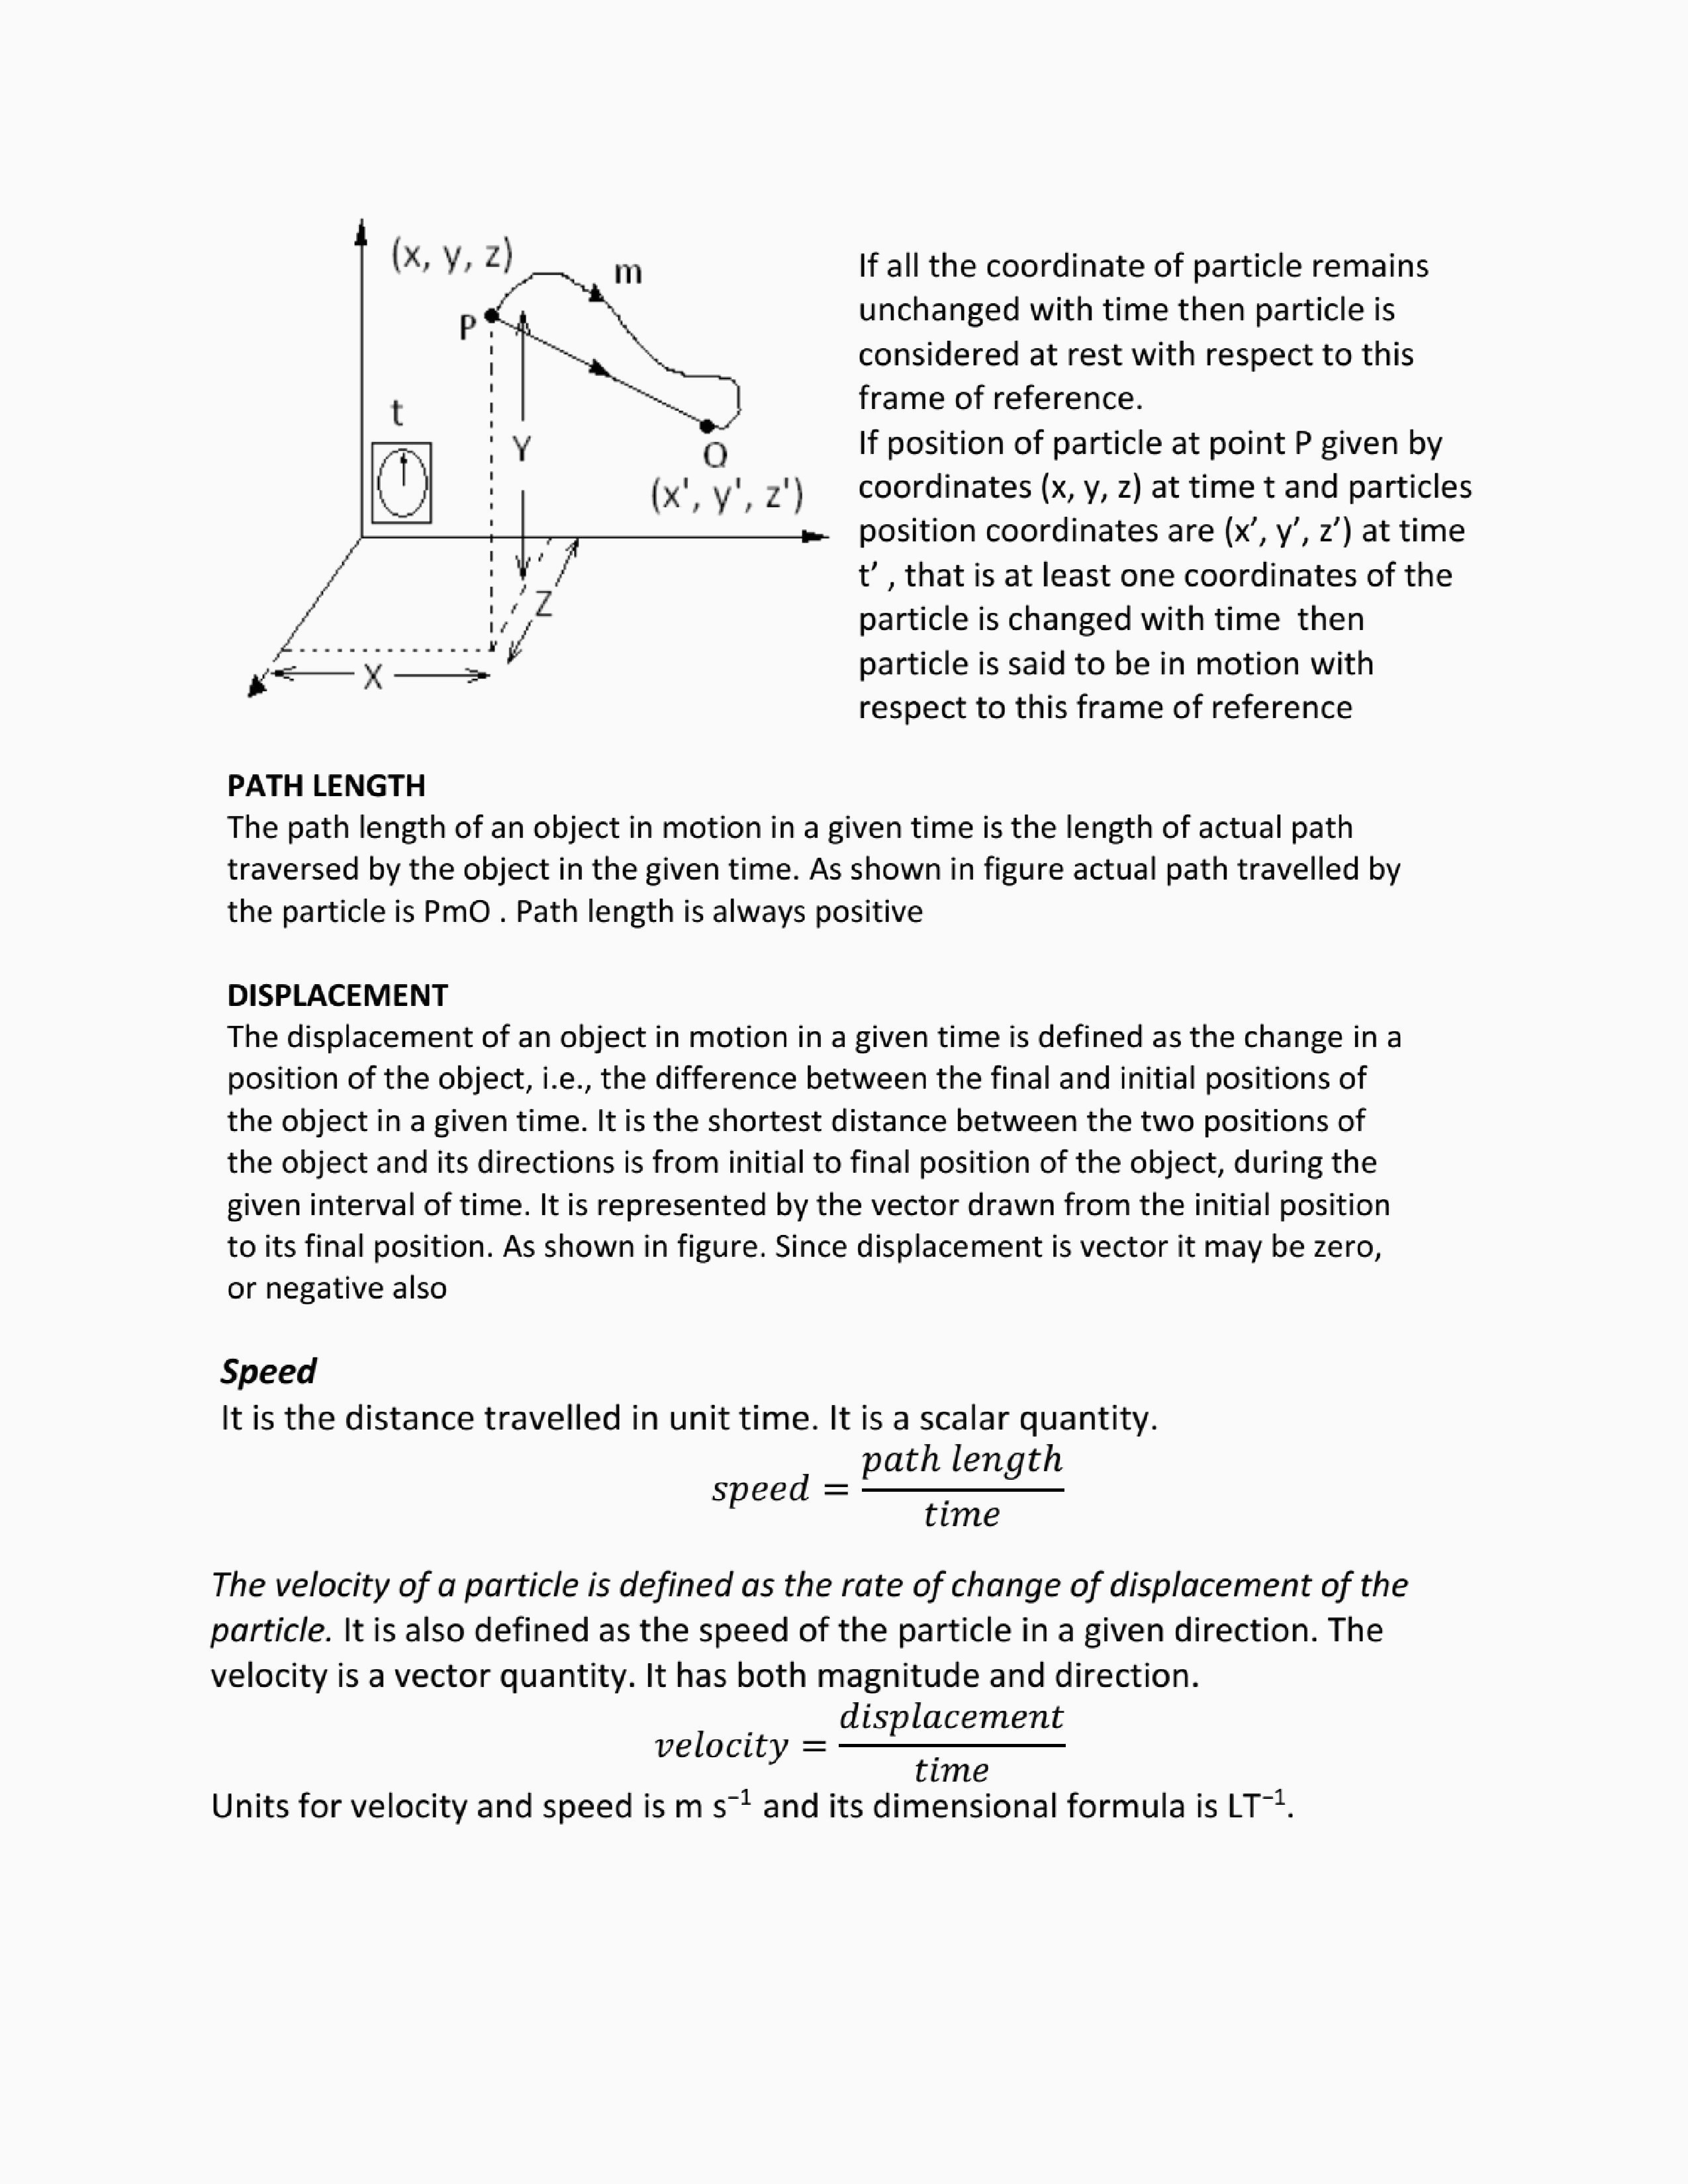 distance-displacement-speed-and-velocity-worksheet-answers-db-excel